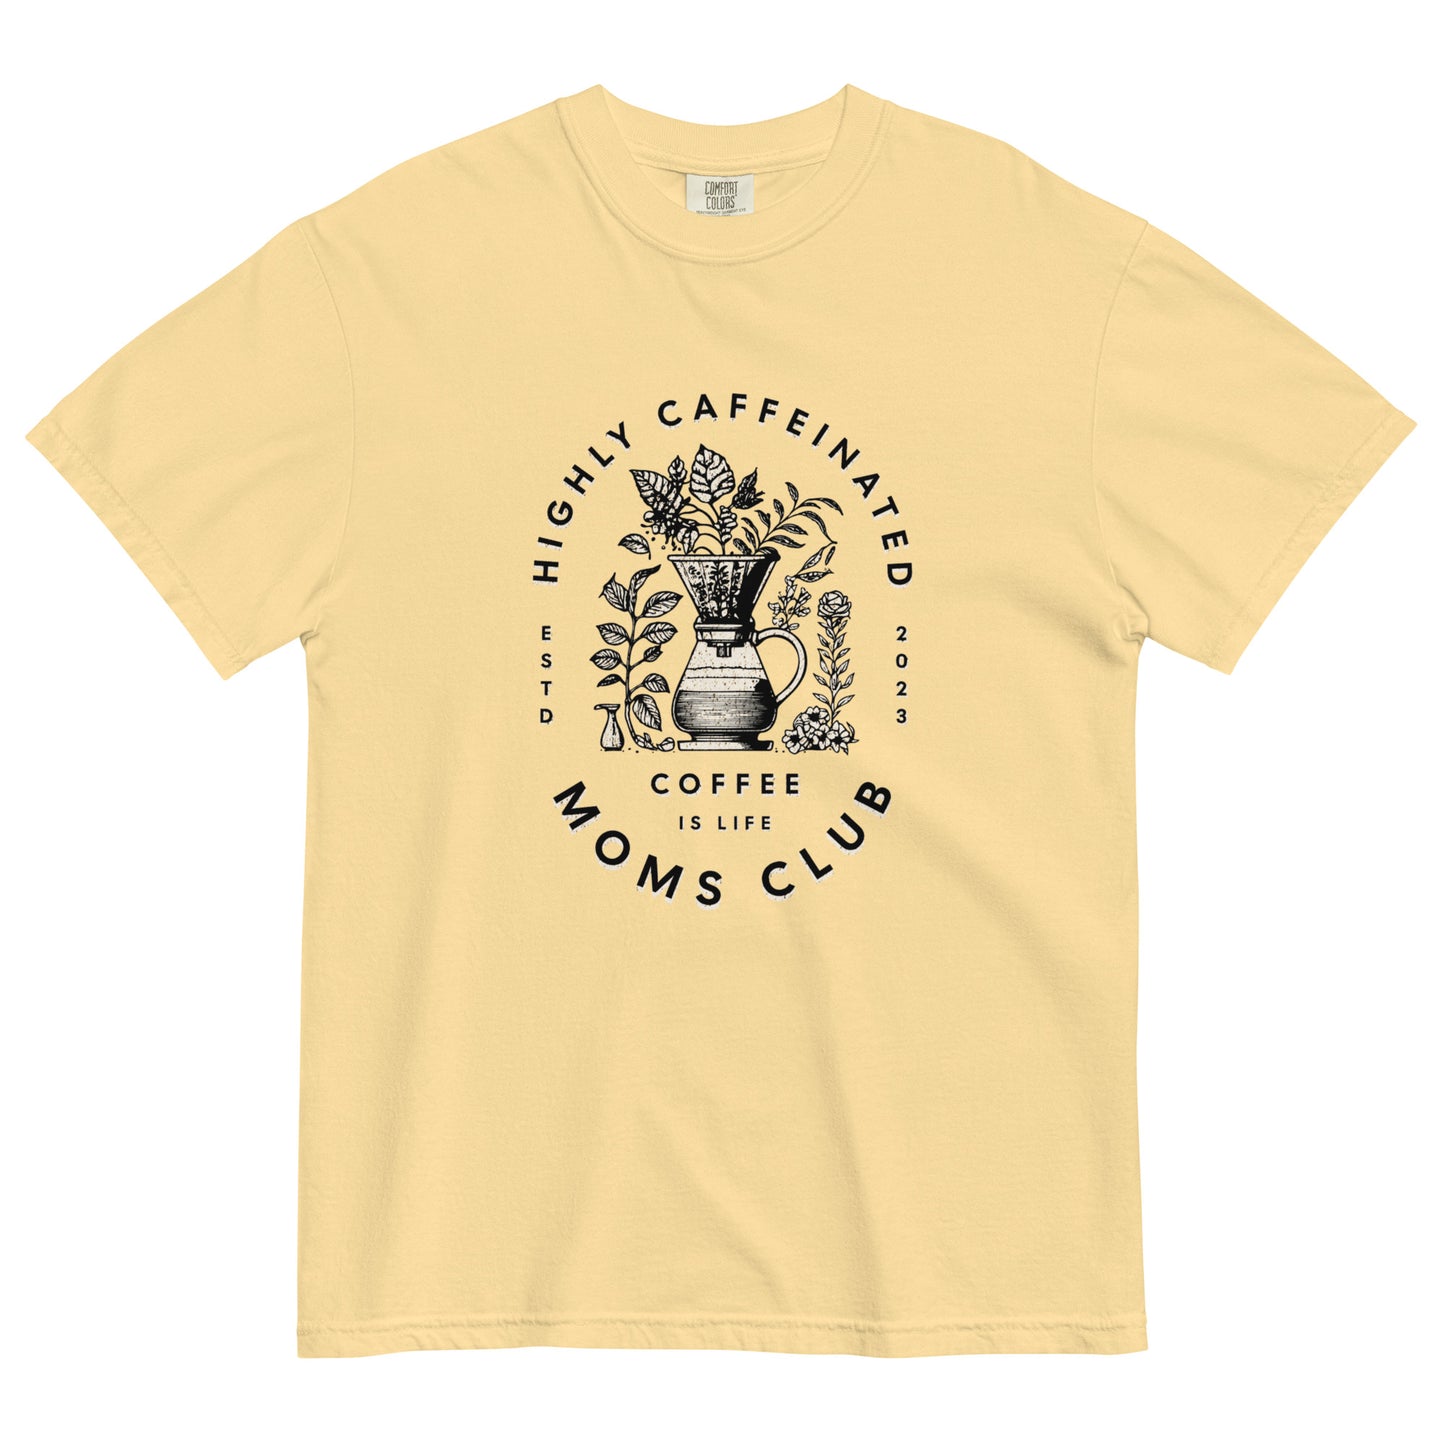 Women's Highly Caffeinated Moms Club Graphic Cotton Tee